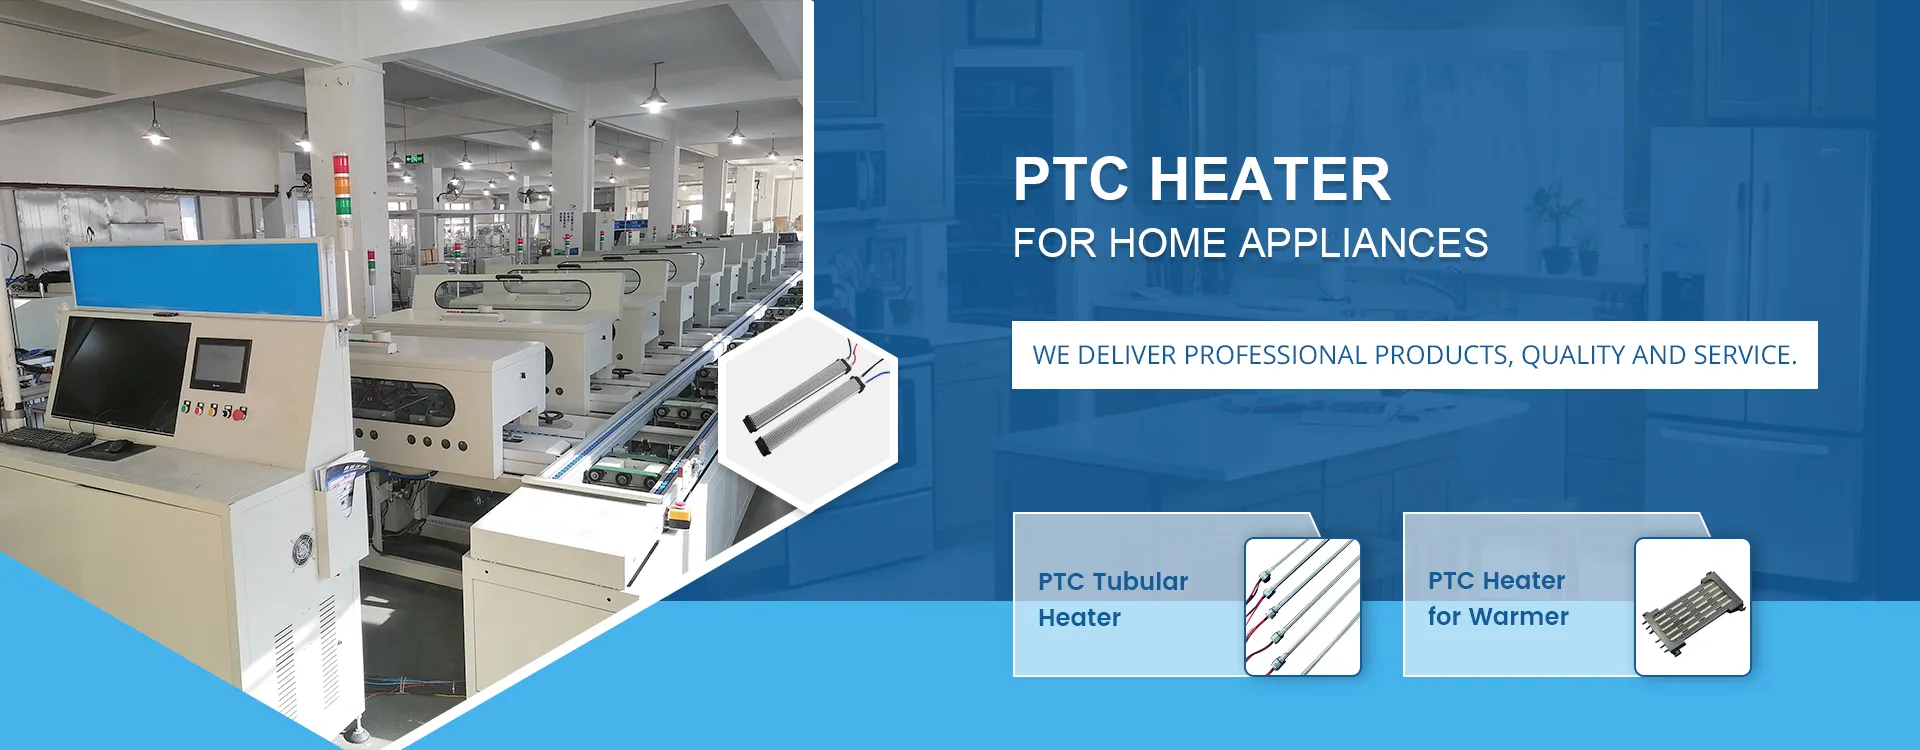 PTC Heater for Home Appliance